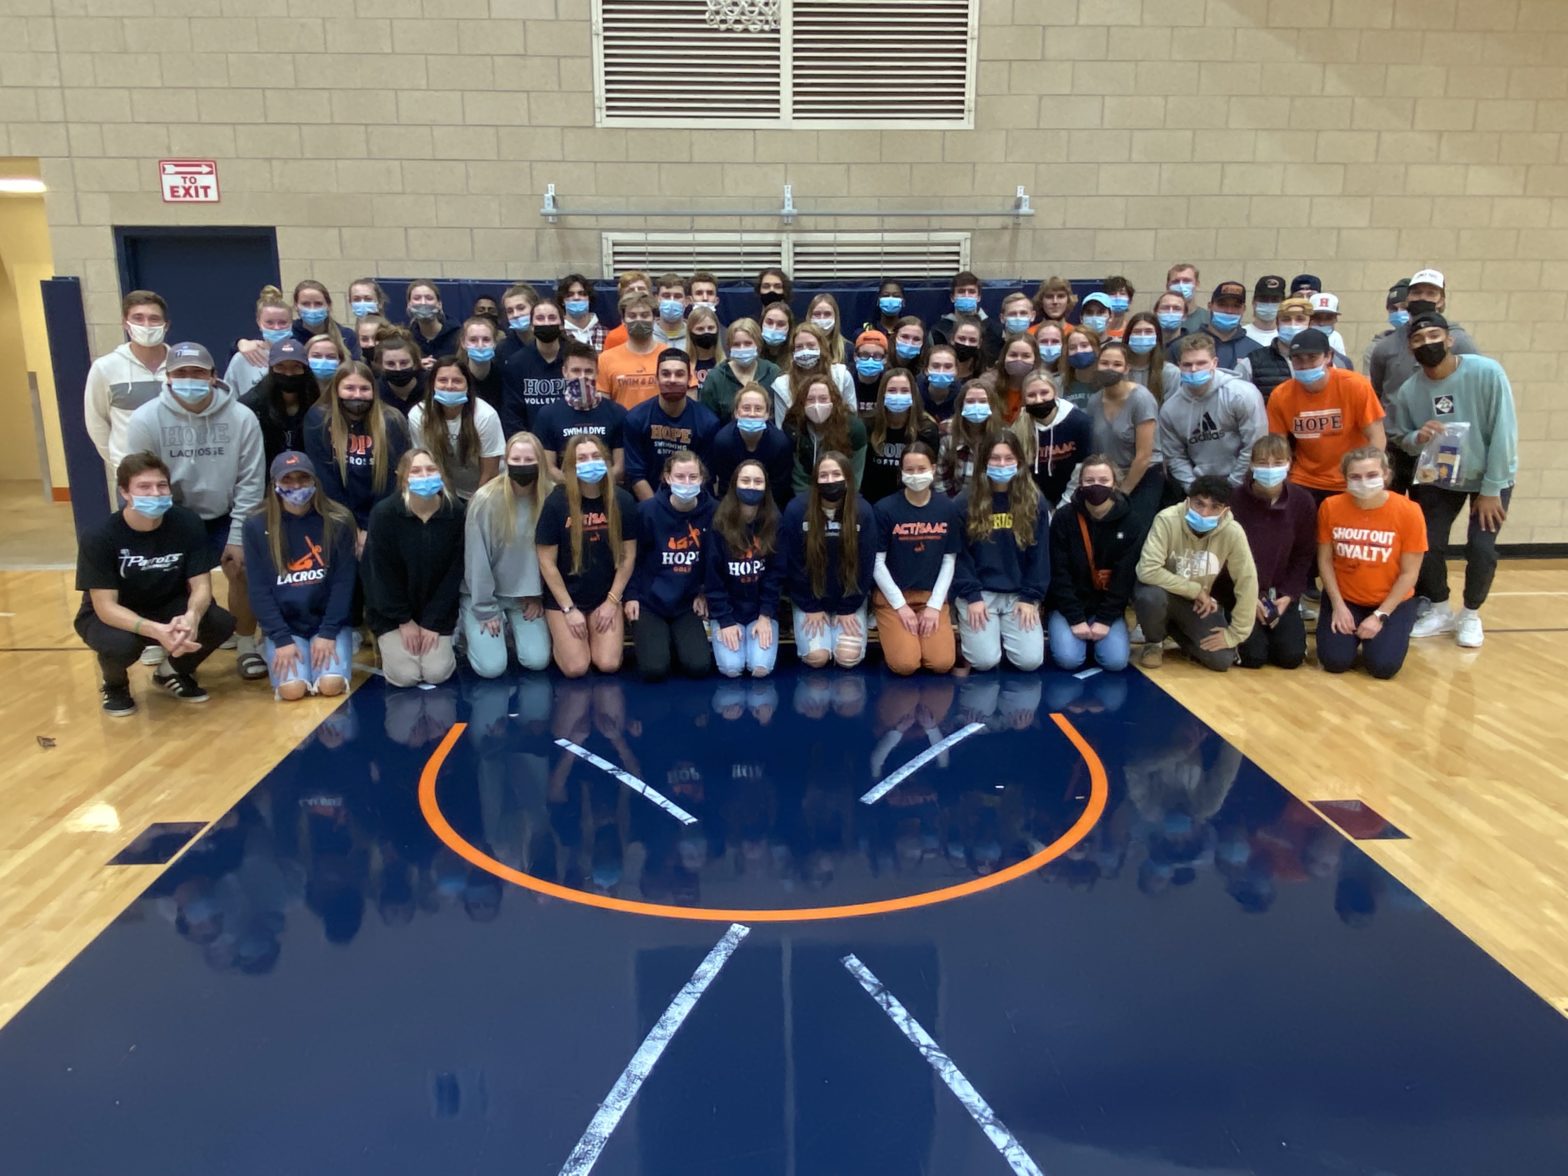 Hope student-athletes pose together for a group photo.